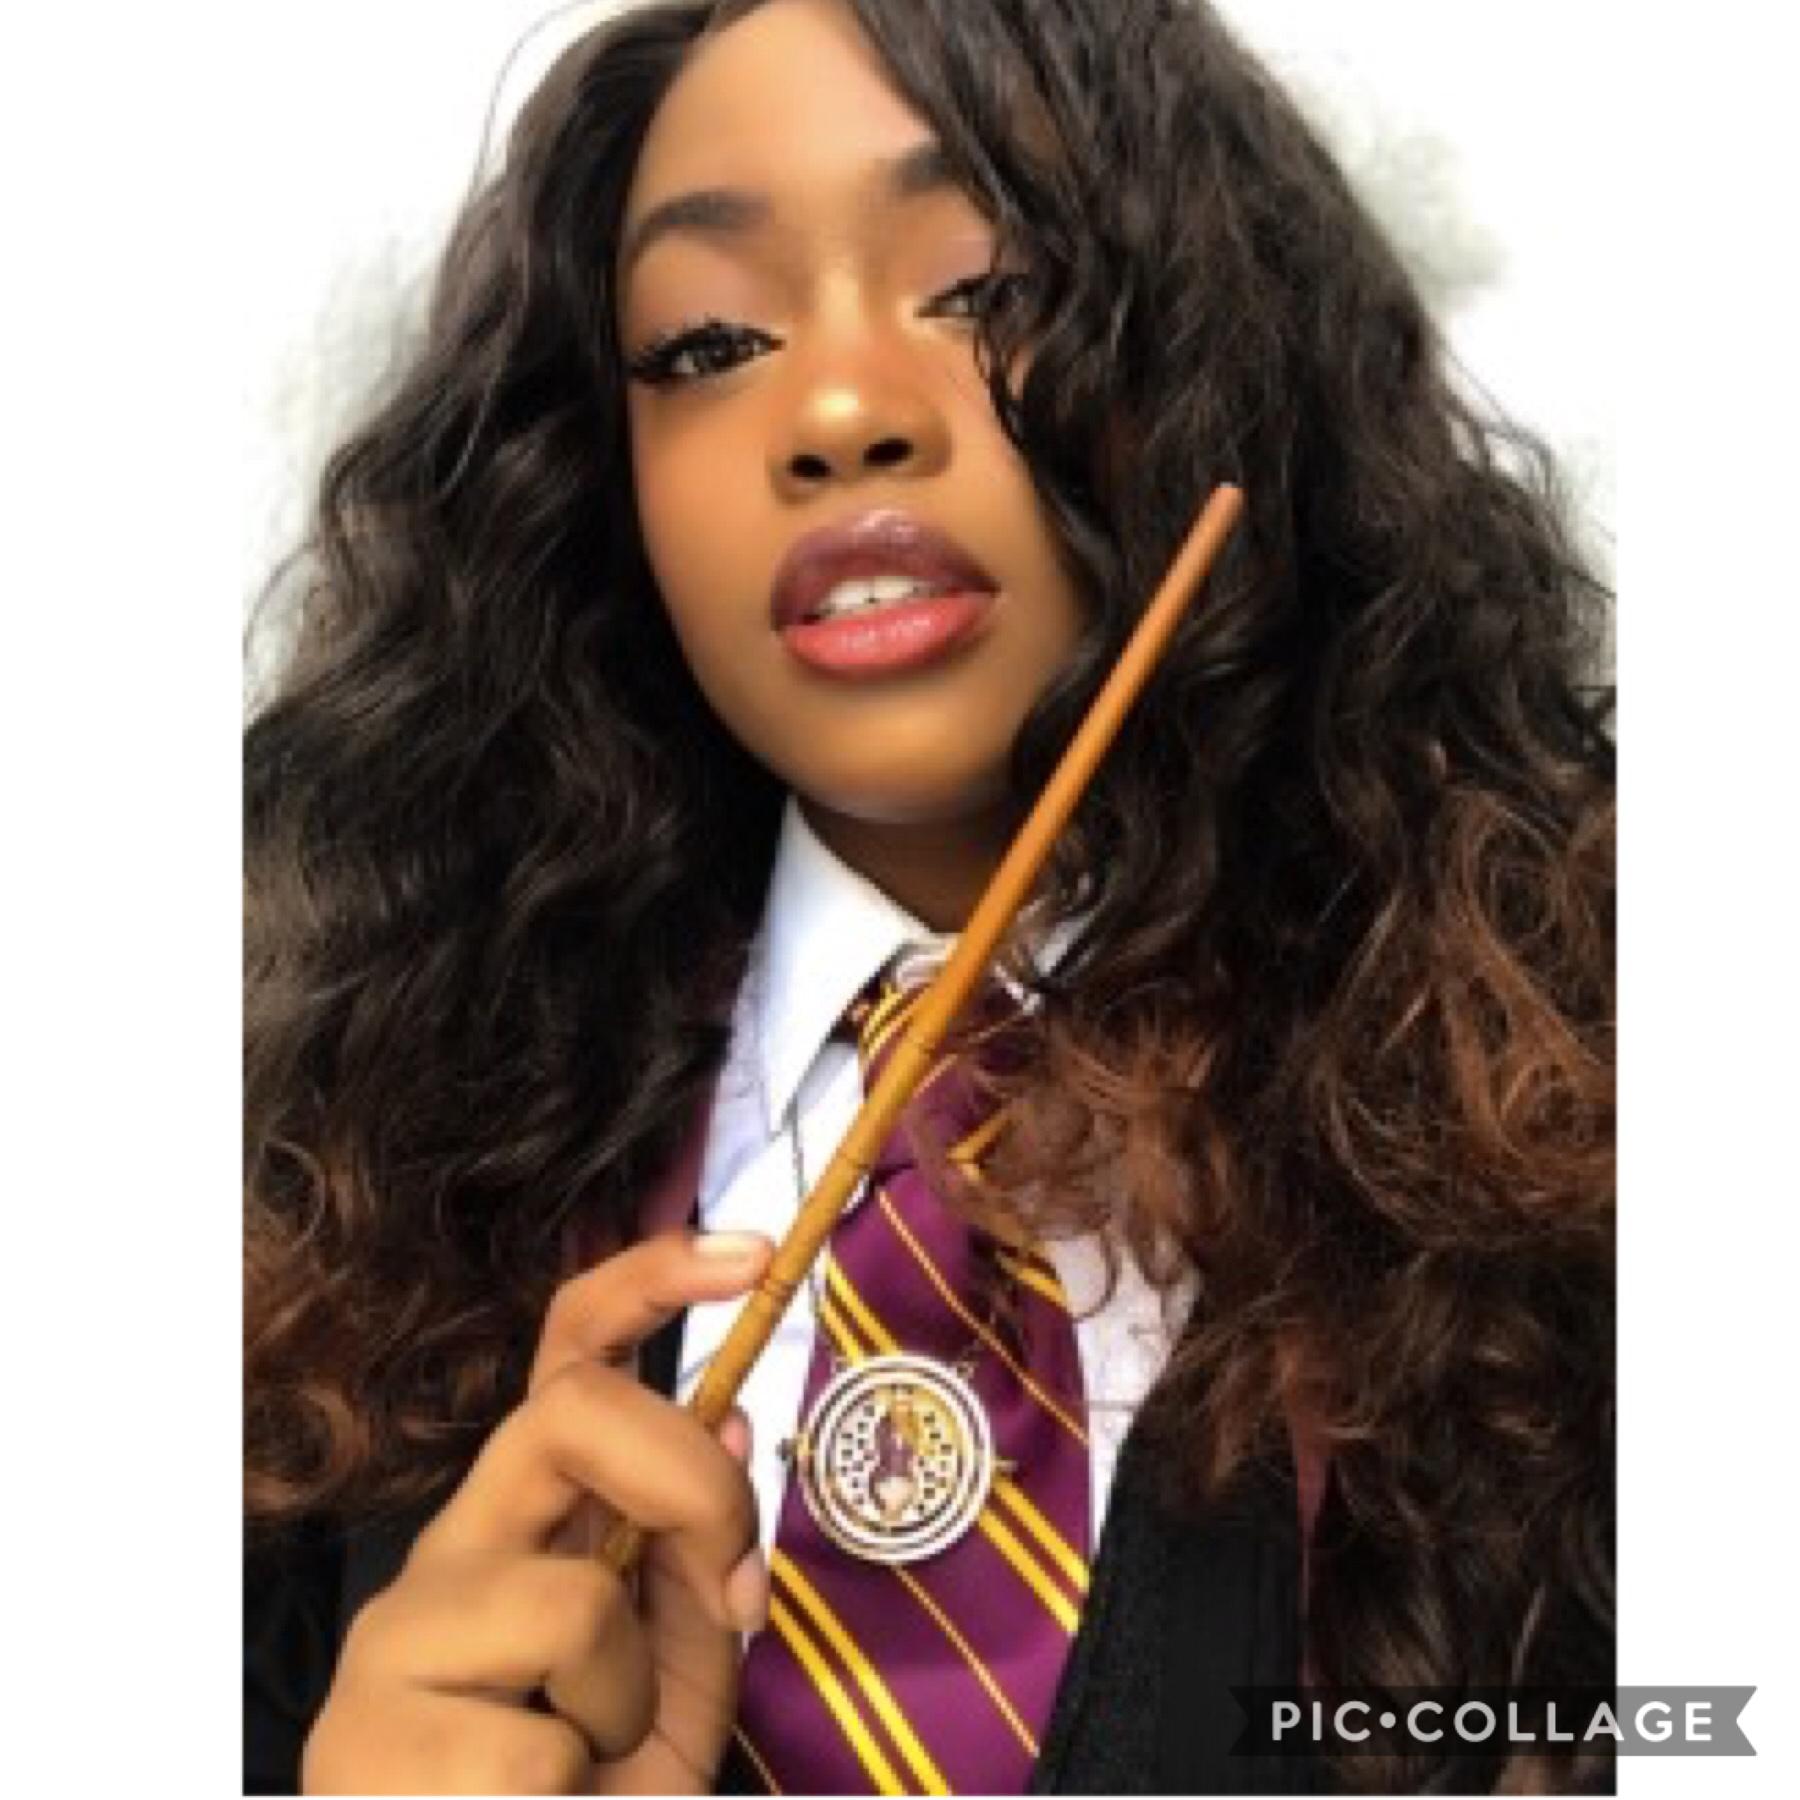 nothing but respect for MY hermione granger